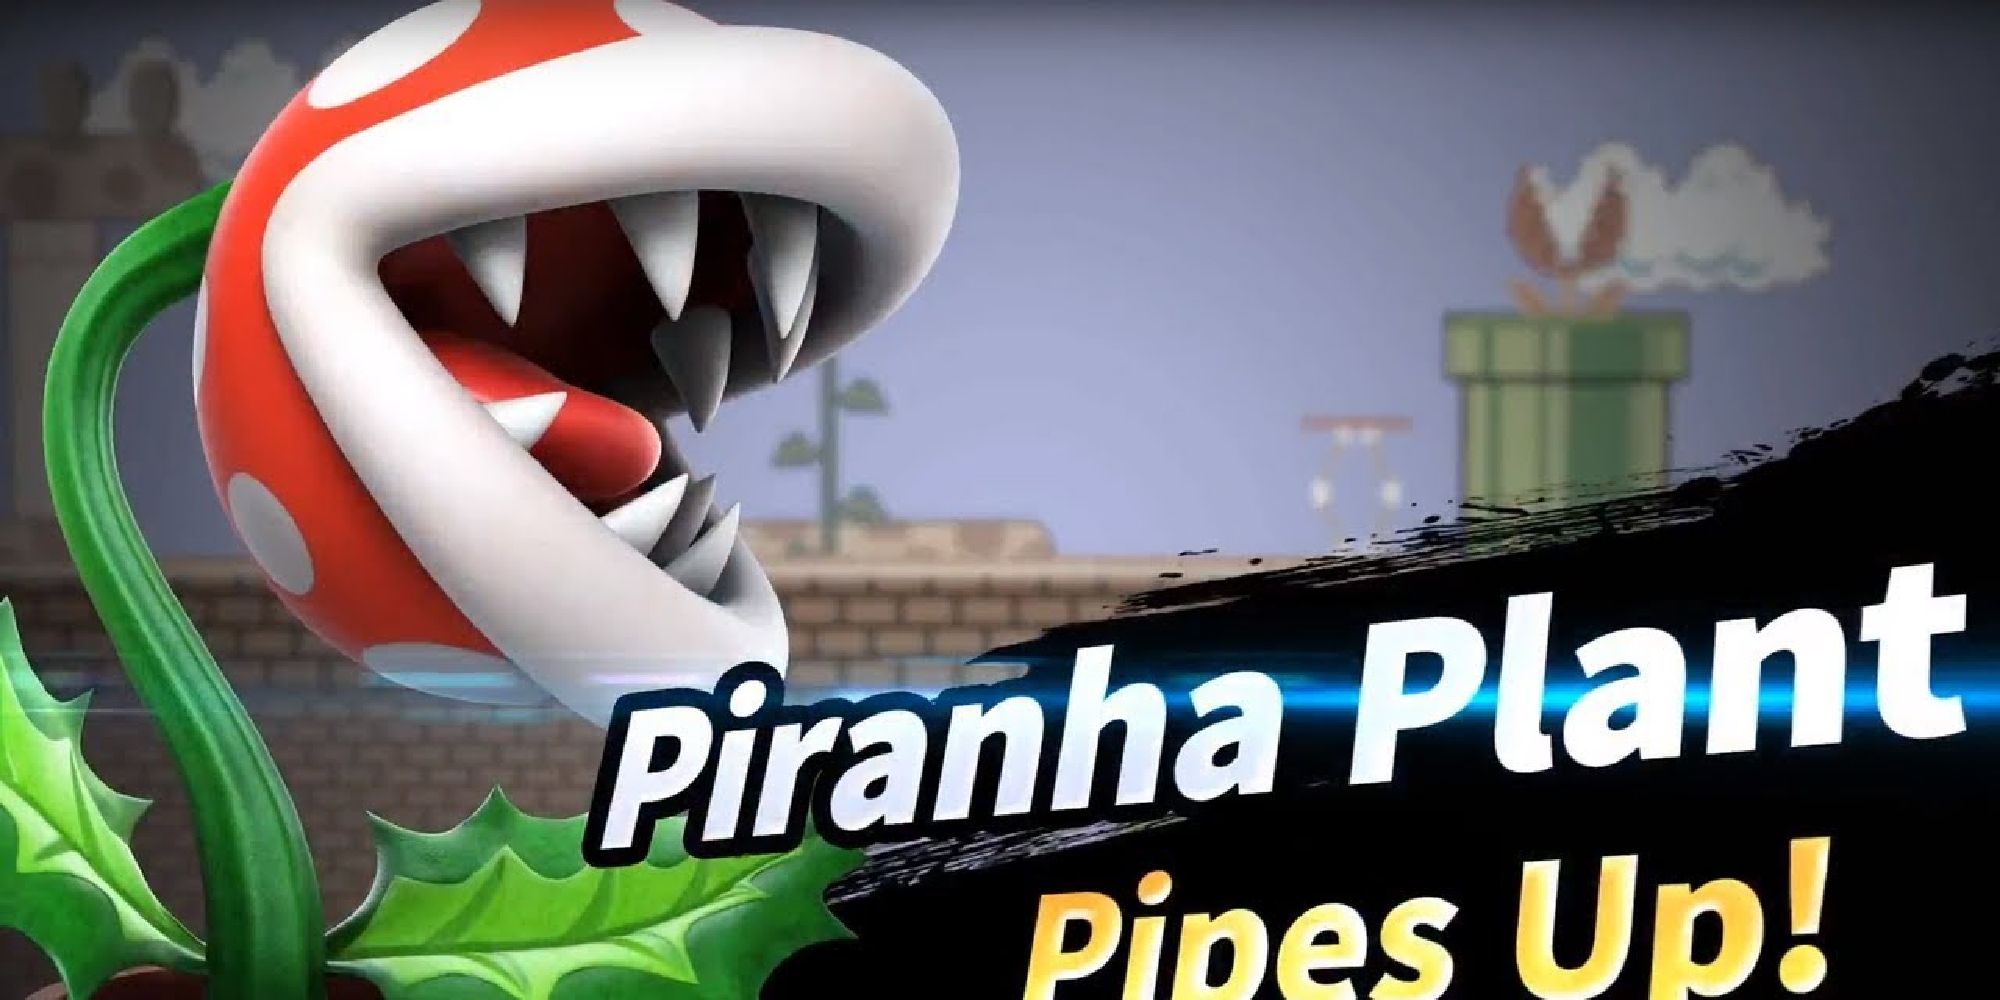 Piranha Plant's title card reading "Piranha Plant Pipes Up" in front of a Super Mario Bros background